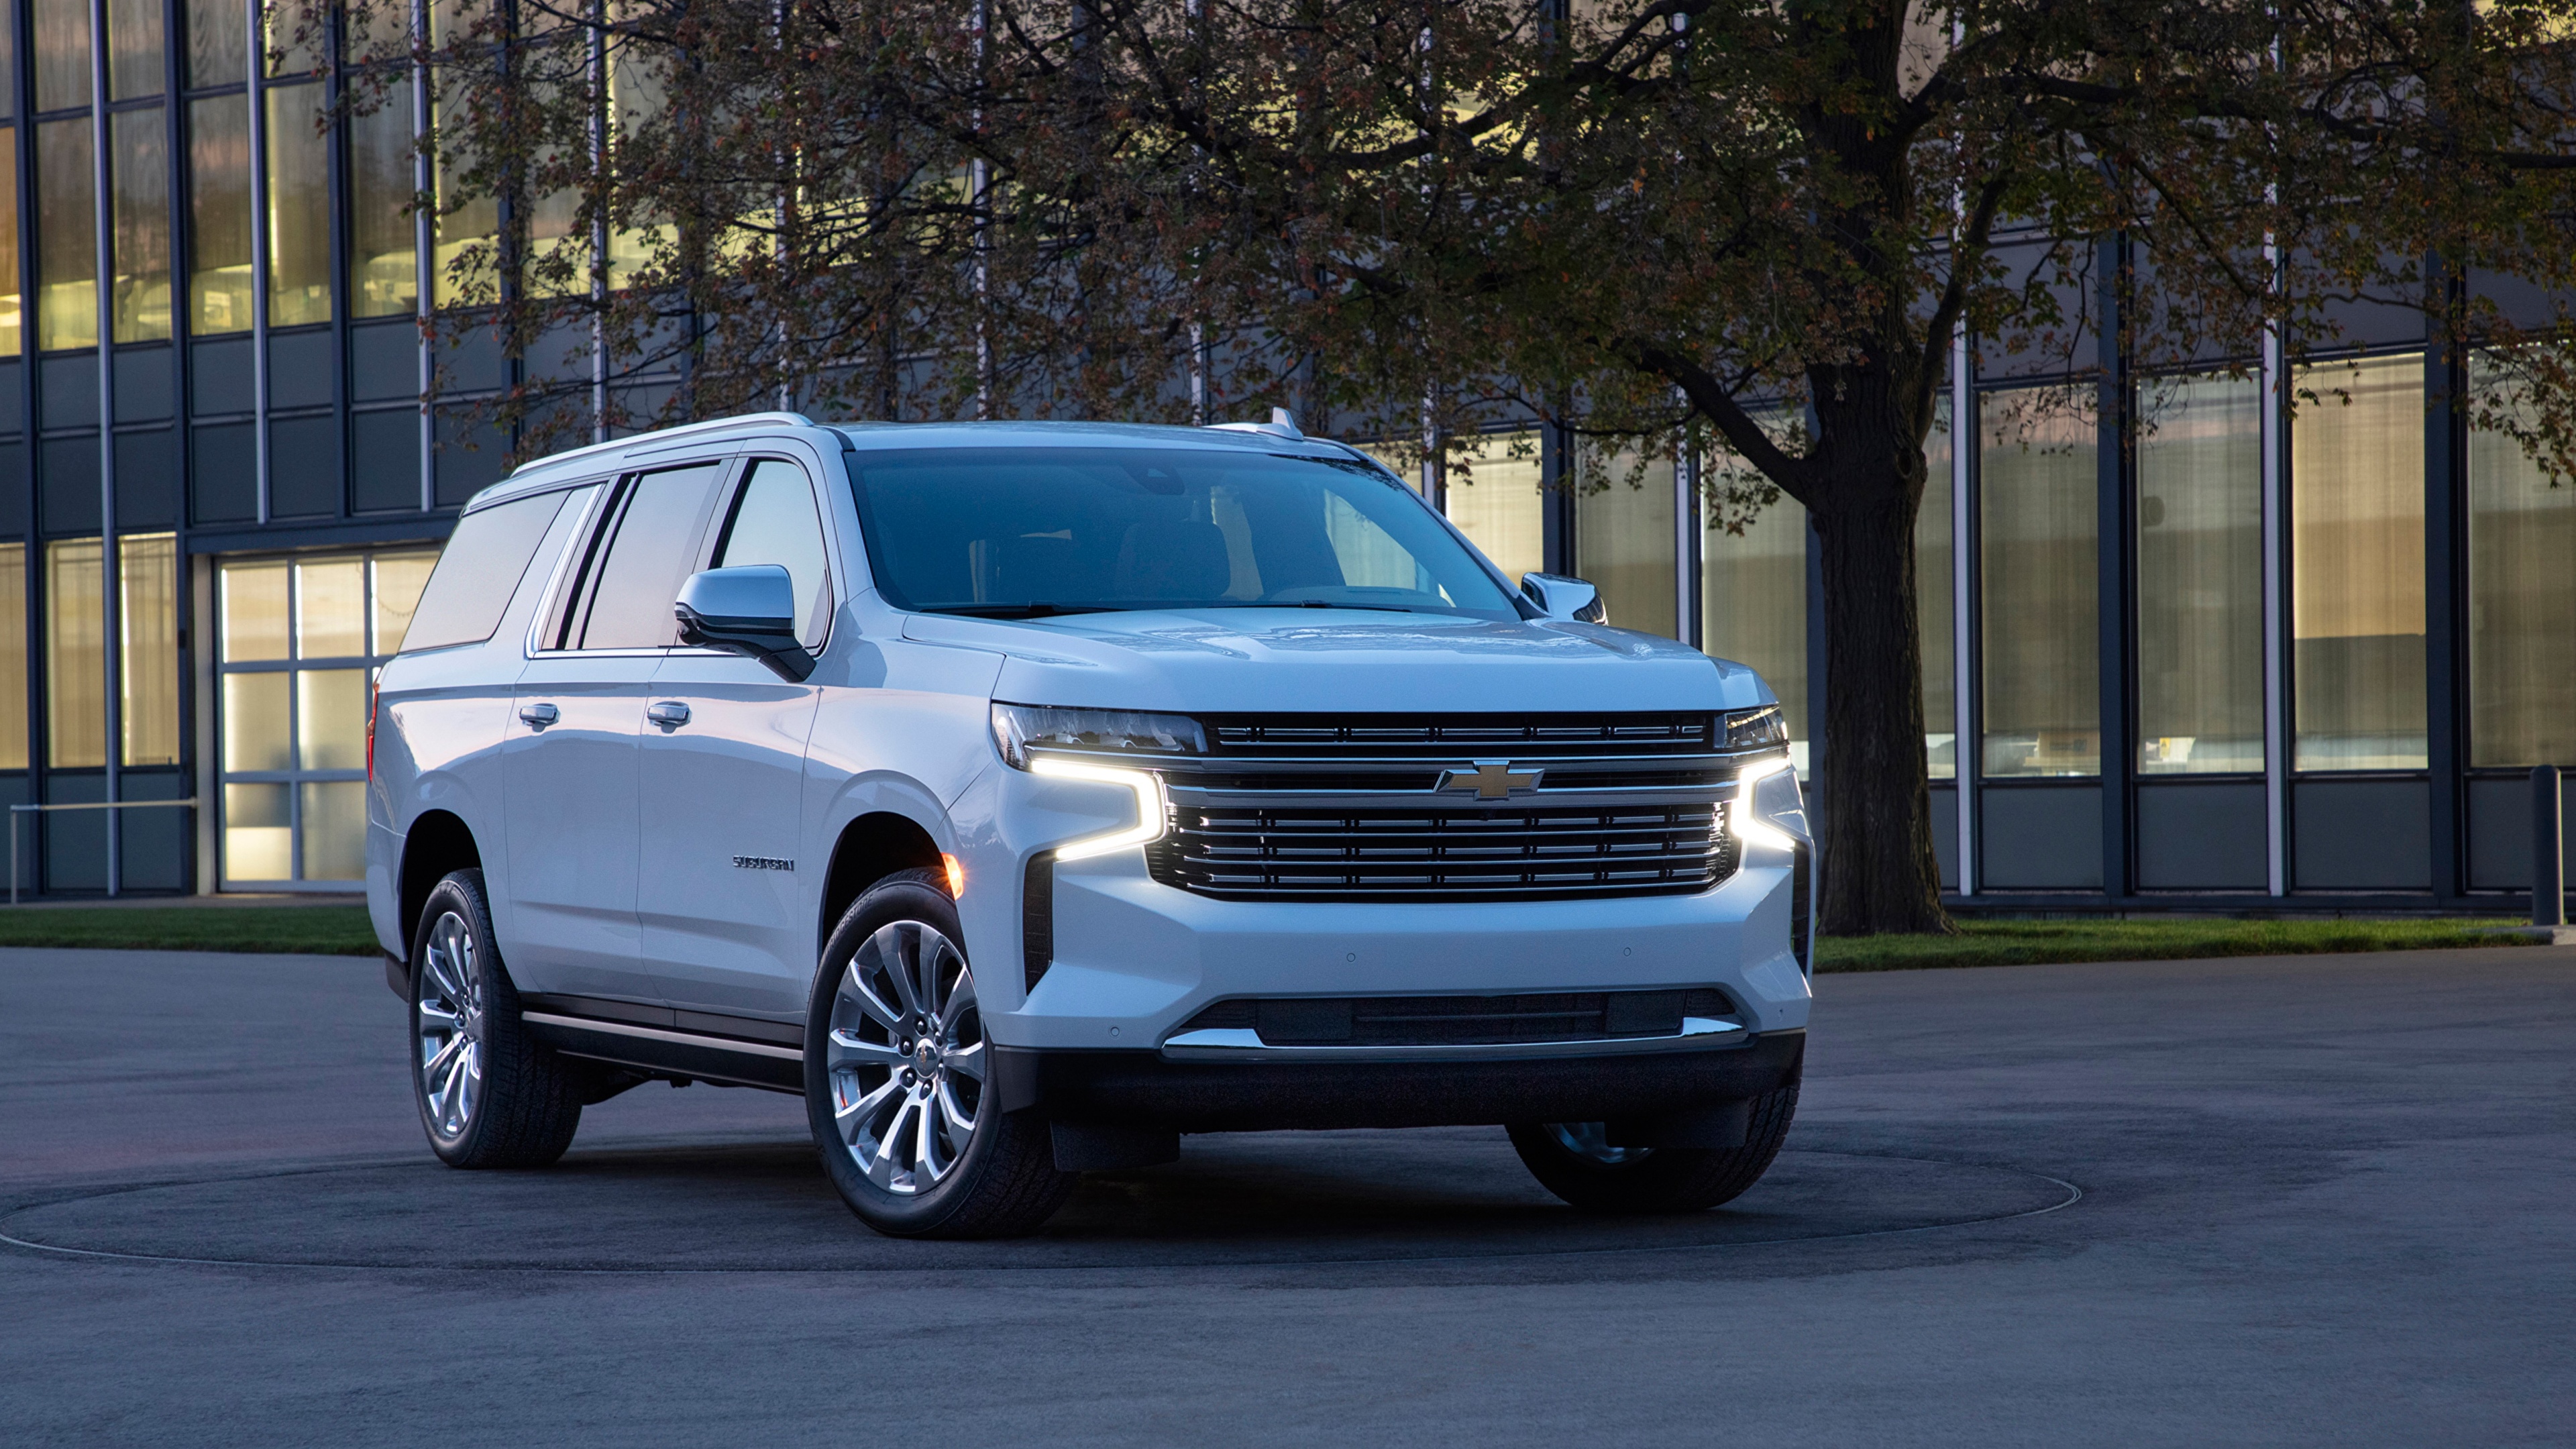 Picture Chevrolet Suv Suburban White Cars Front 3840x2160